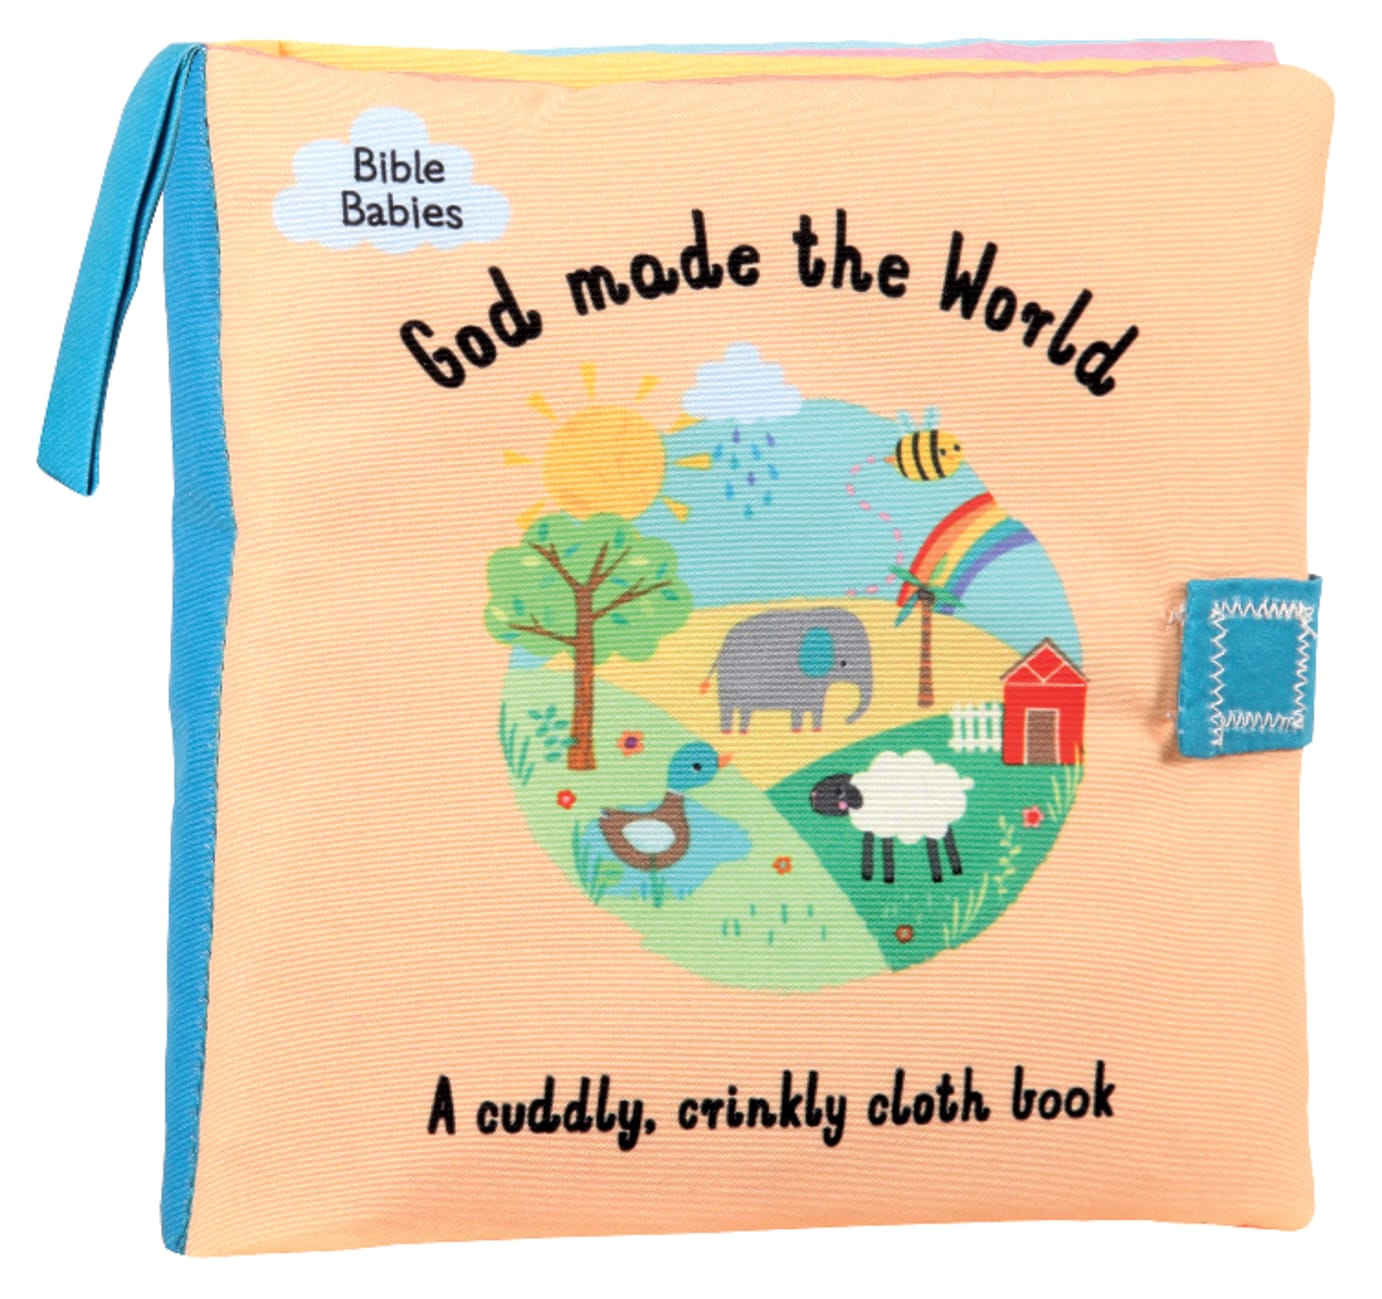 God Made the World; a Cuddly Crinkly Cloth Book Novelty Book